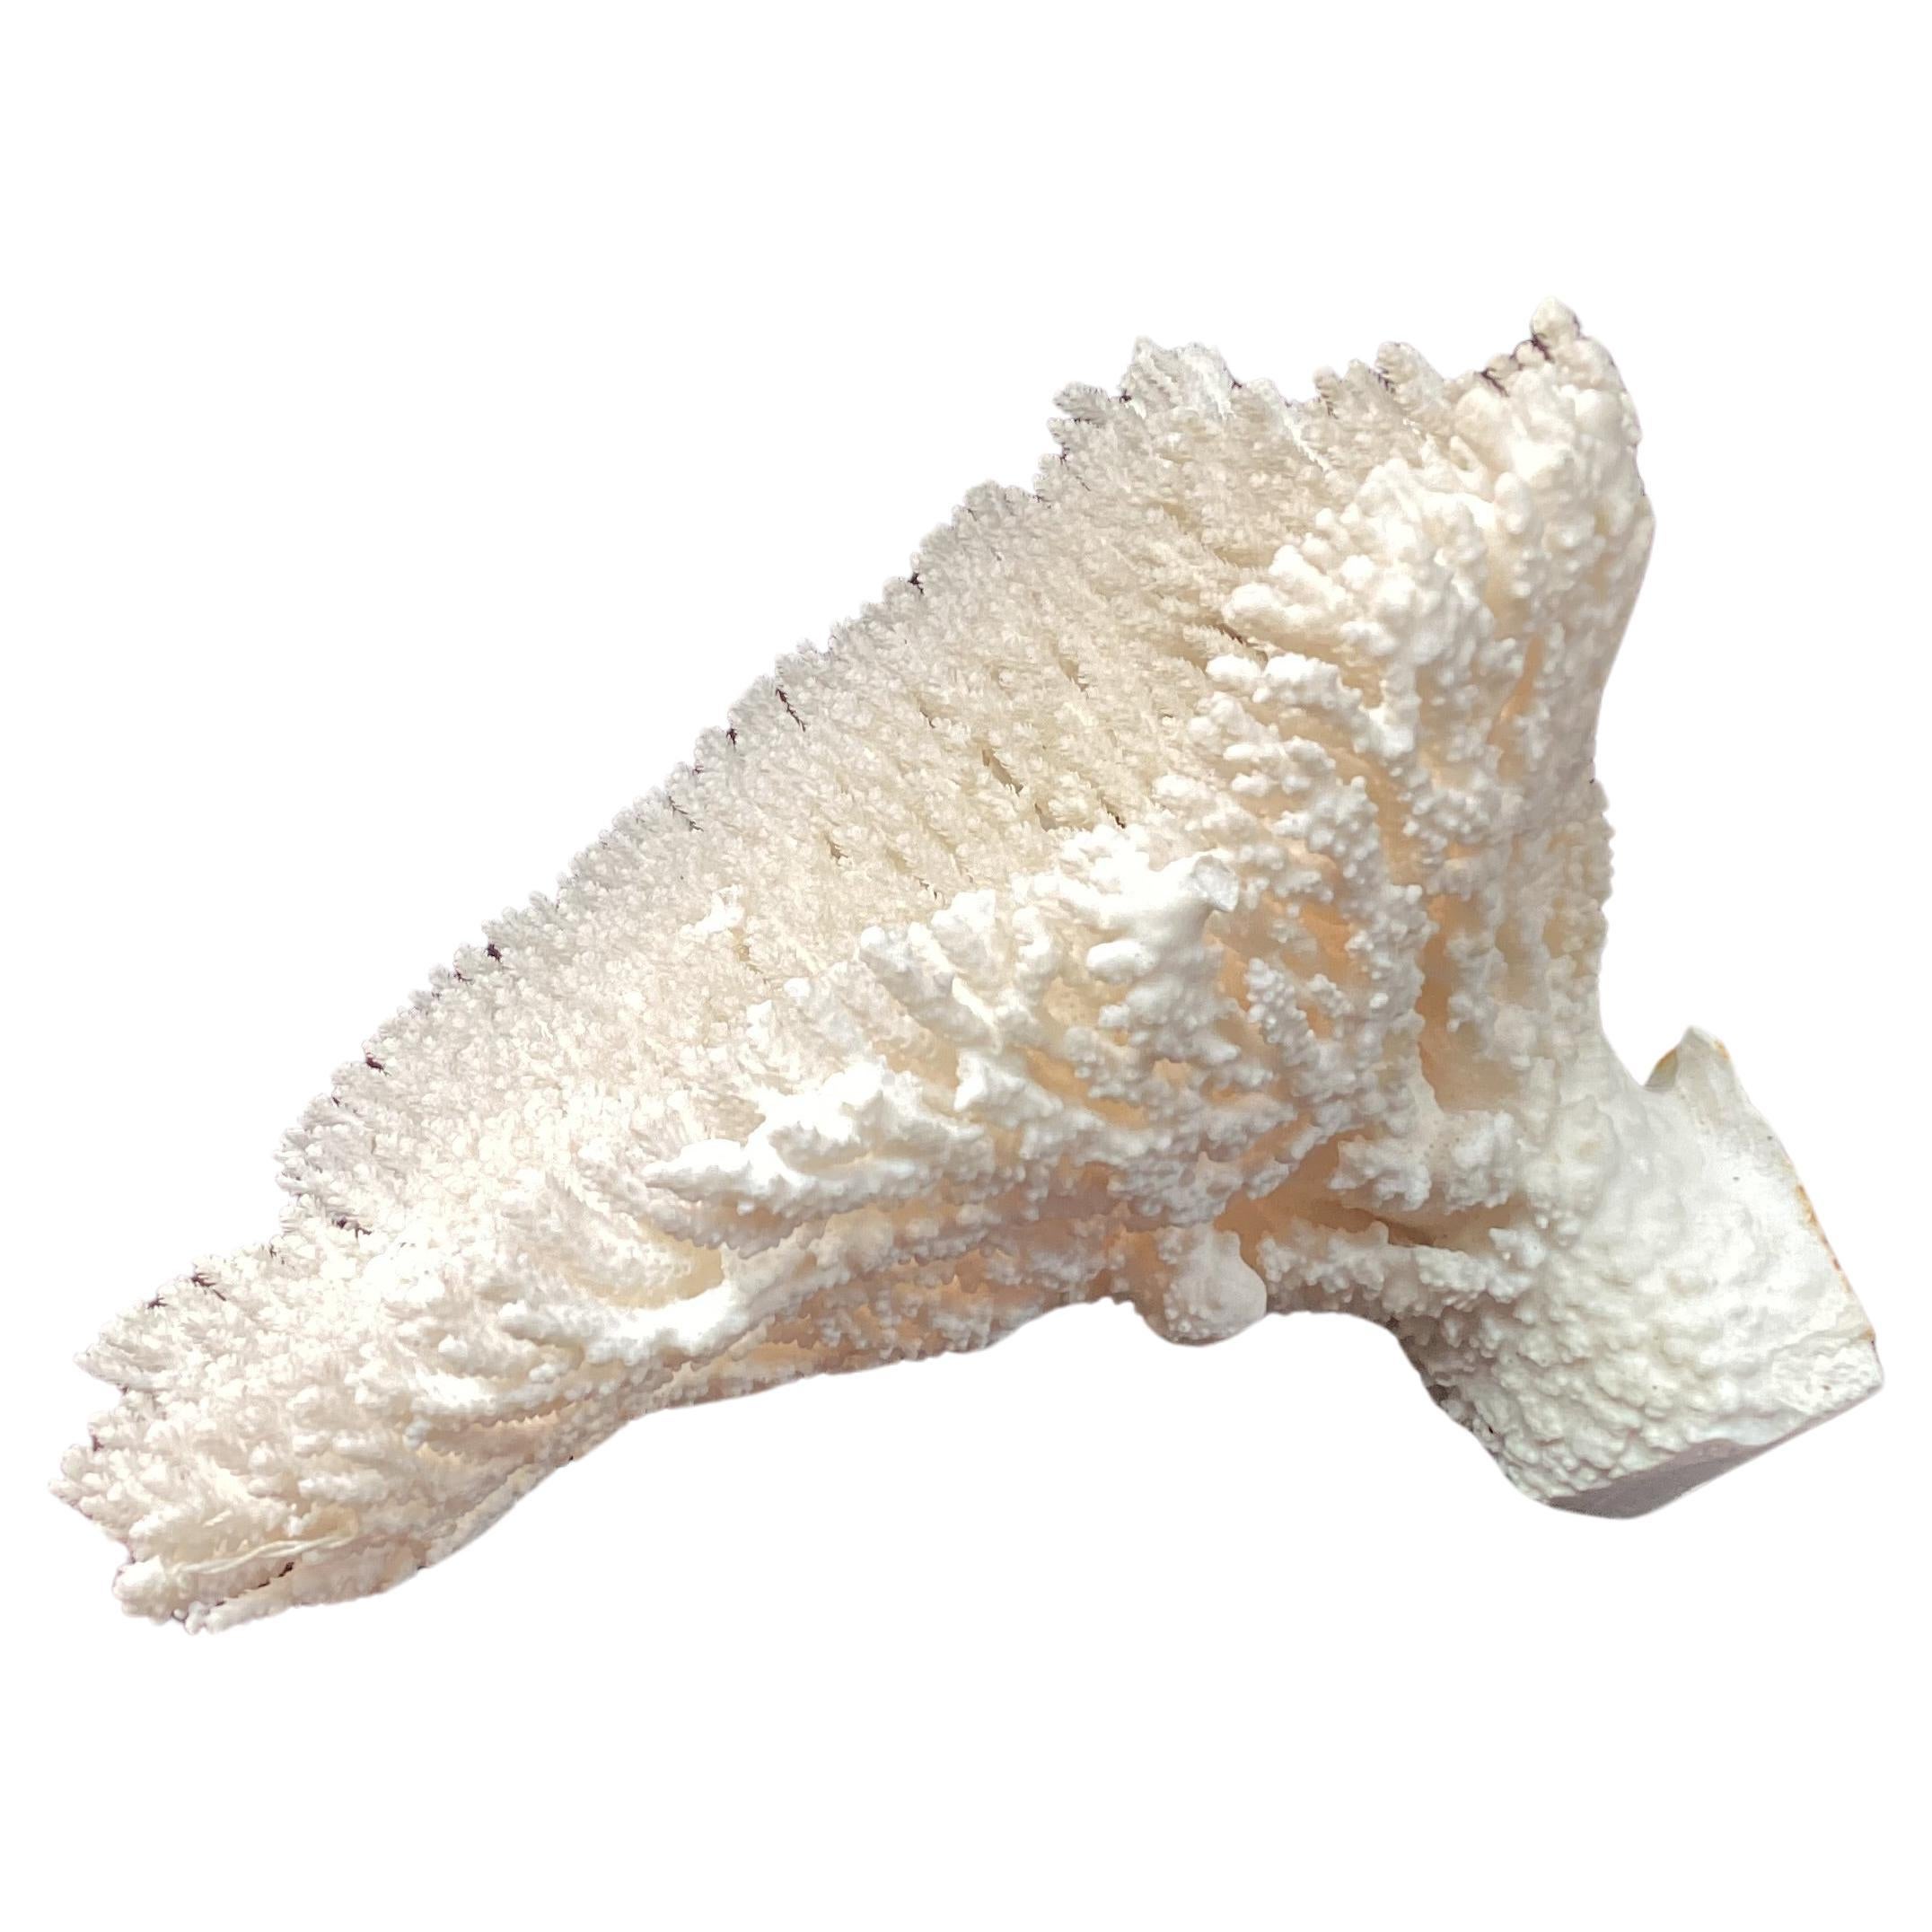 Organic Modern Natural White Coral Reef Specimen     #2 For Sale